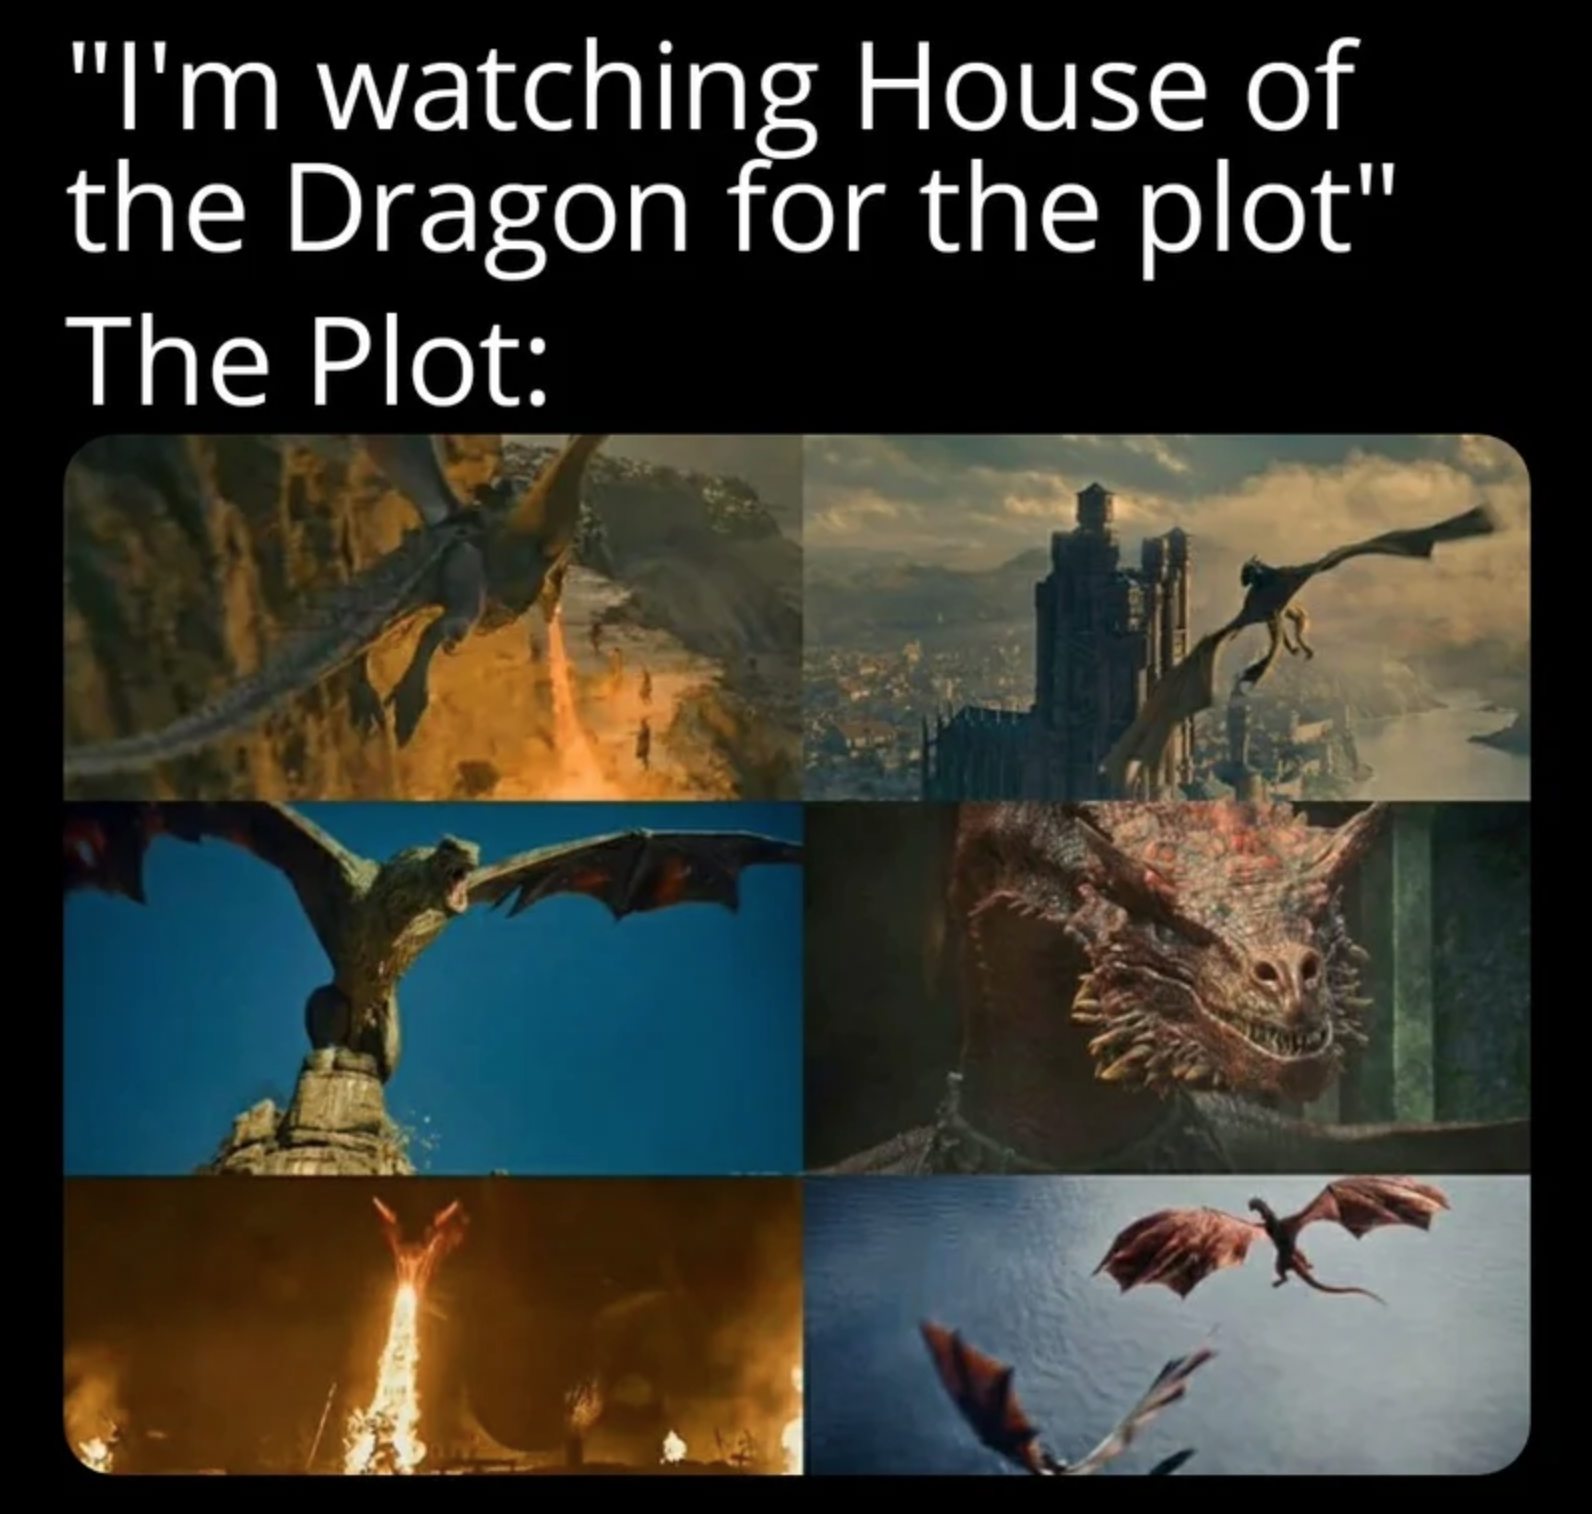 fauna - "I'm watching House of the Dragon for the plot" The Plot